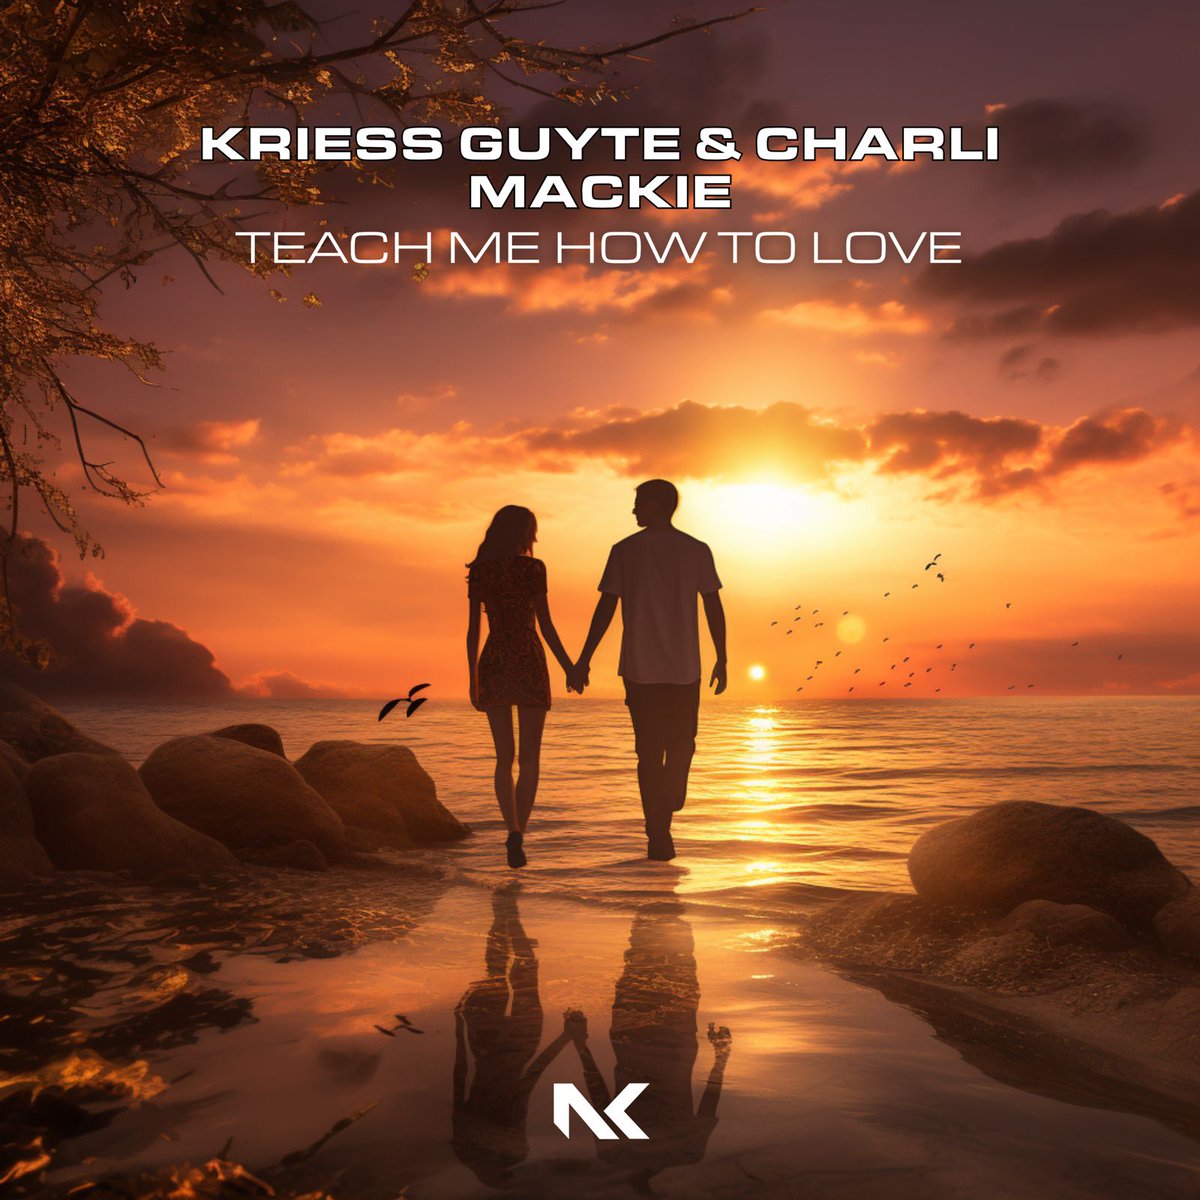 Coming soon on @NKMus_official. Pre-save now!🔥 Nico Cranxx - Gawat fusion.complete.me/gawat Kriess Guyte & Charli Mackie - Teach me how to love nk.complete.me/teachmehowtolo… Release date: 26.02.24 #Nocturnalknights #newmusic #presave